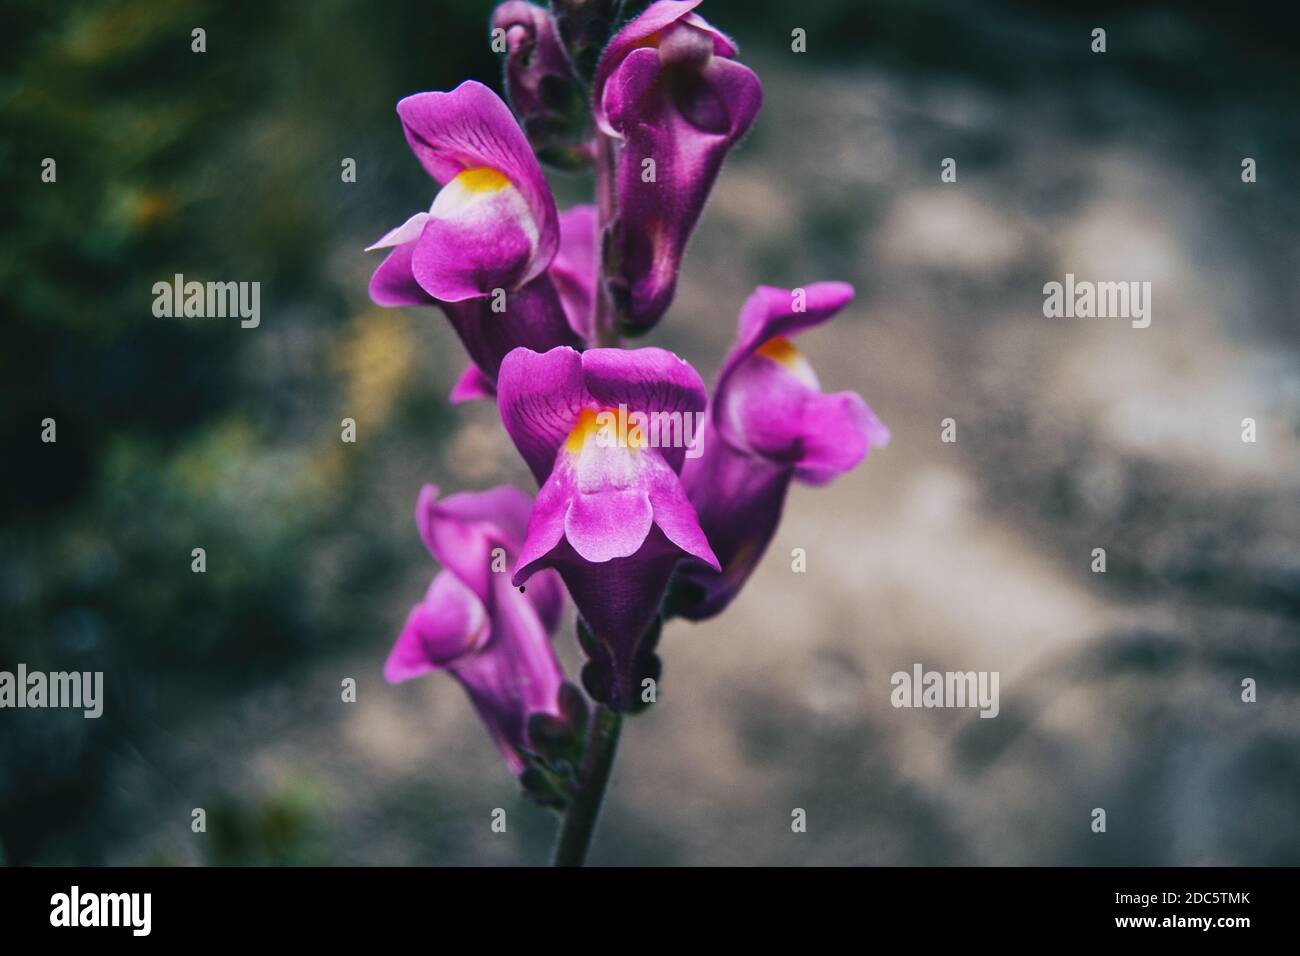 Detail of some purple flowers of antirrhinum majus on a stem in nature Stock Photo